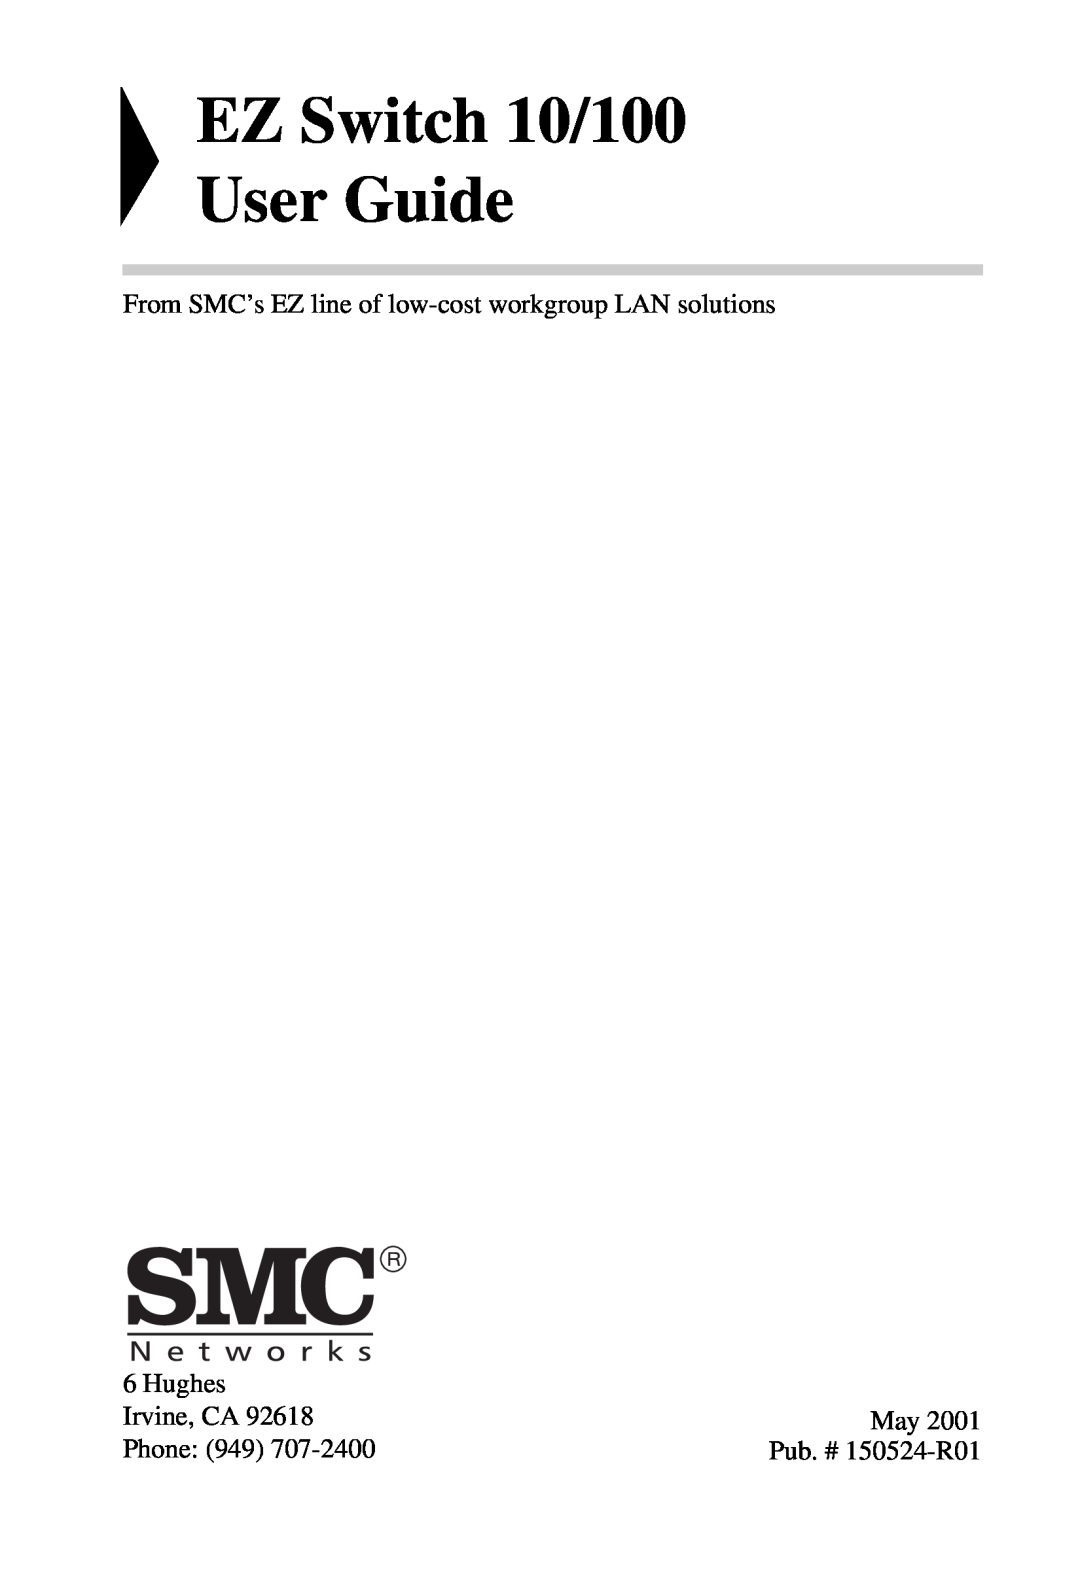 SMC Networks SMC-EZ1024DT EZ Switch 10/100 User Guide, From SMC’s EZ line of low-cost workgroup LAN solutions, Hughes 